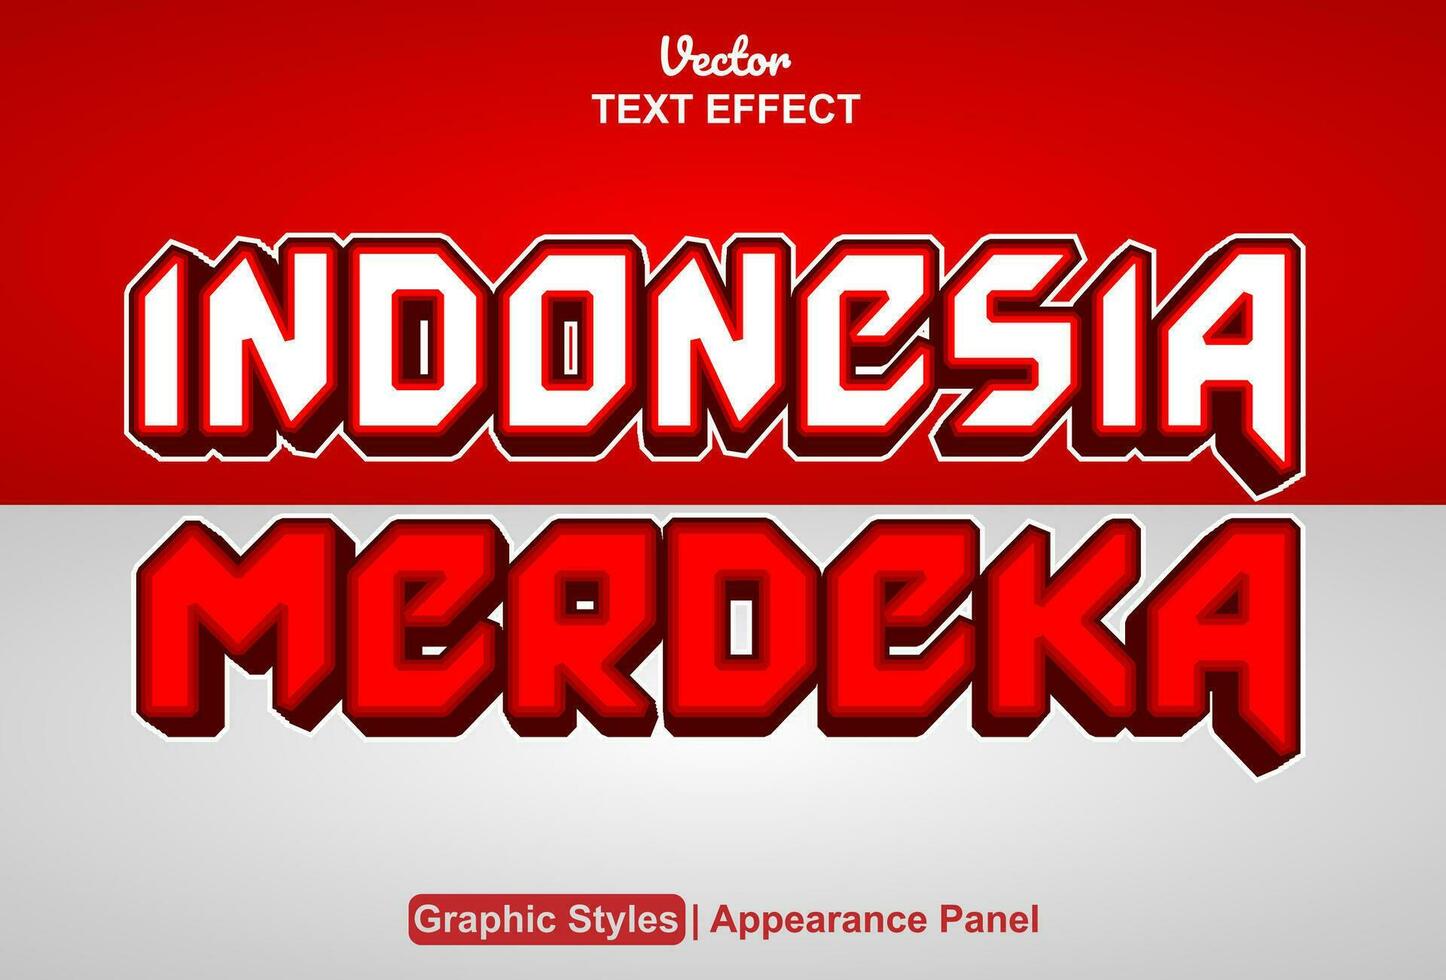 indonesia merdeka text effect with graphic style and editable. vector